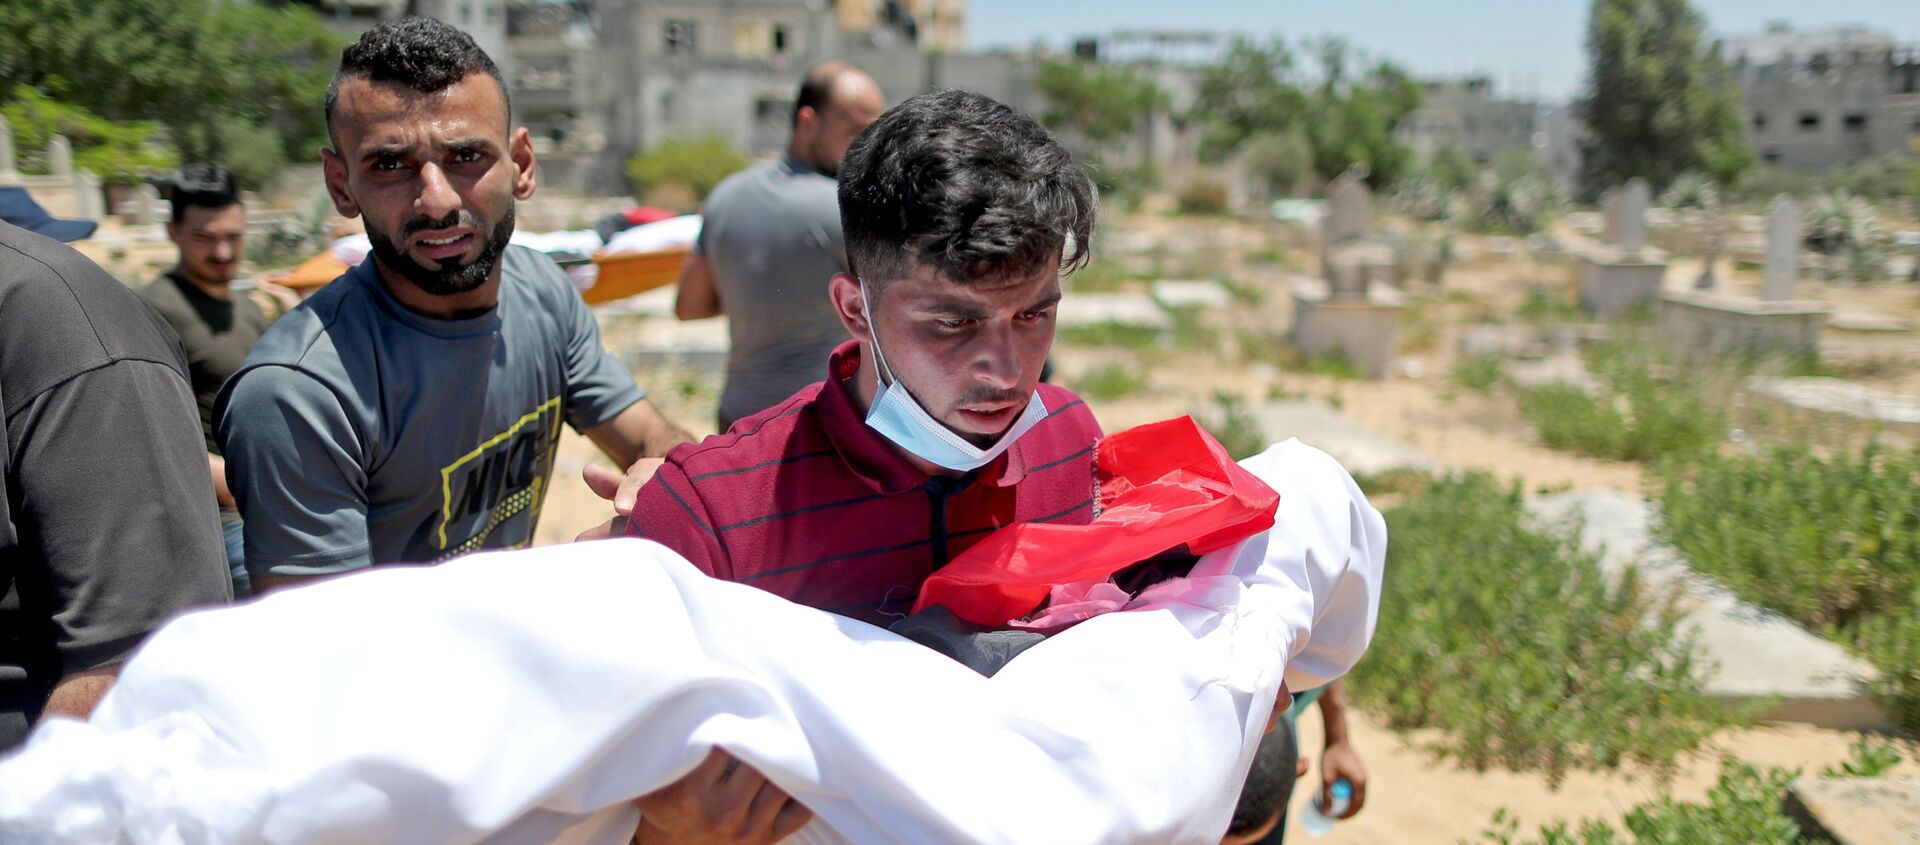 A man carries the body of a Palestinian child from Al-Hadidi family, who was killed amid a flare-up of Israeli-Palestinian violence, during their funeral at a cemetery in the northern Gaza Strip May 15, 2021. - Sputnik International, 1920